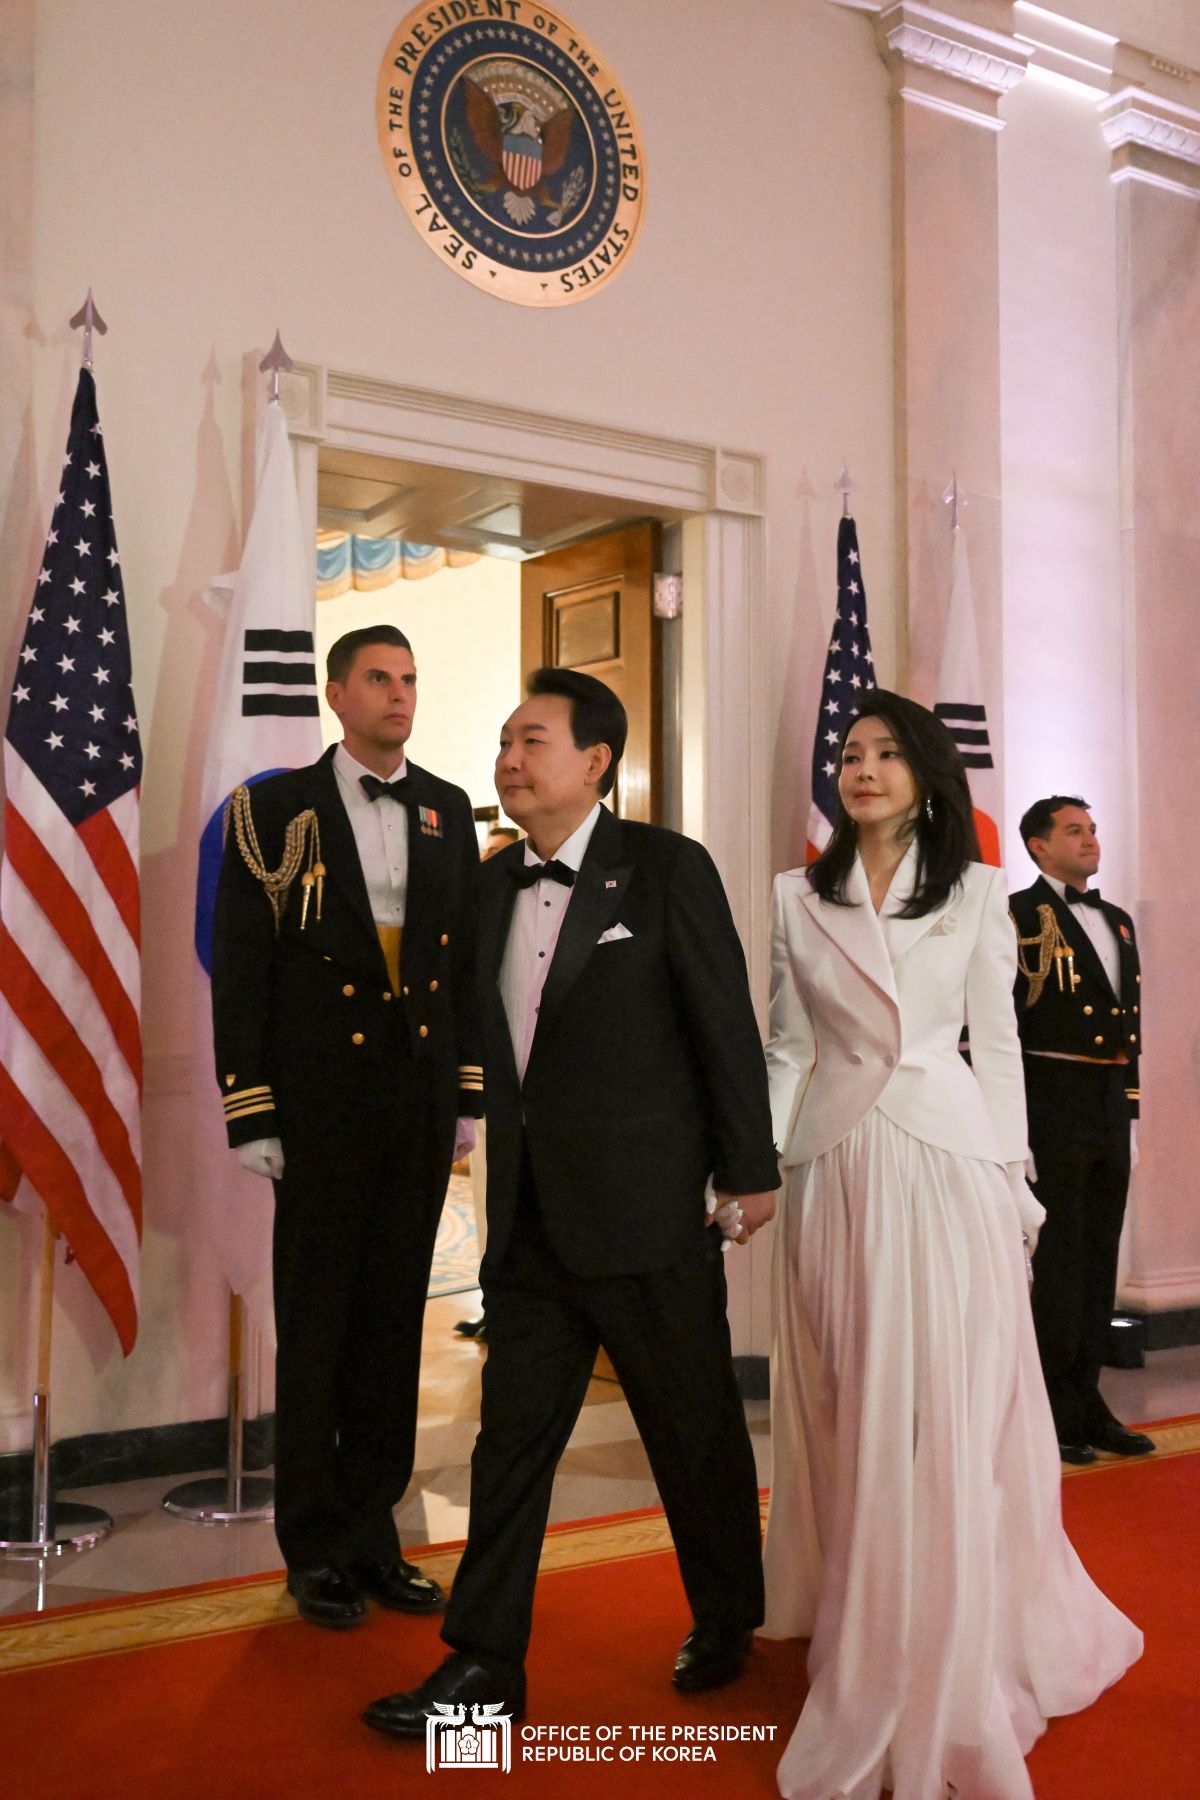 The President and First Lady attending the State Dinner hosted by the U.S. President and First Lady Slide11